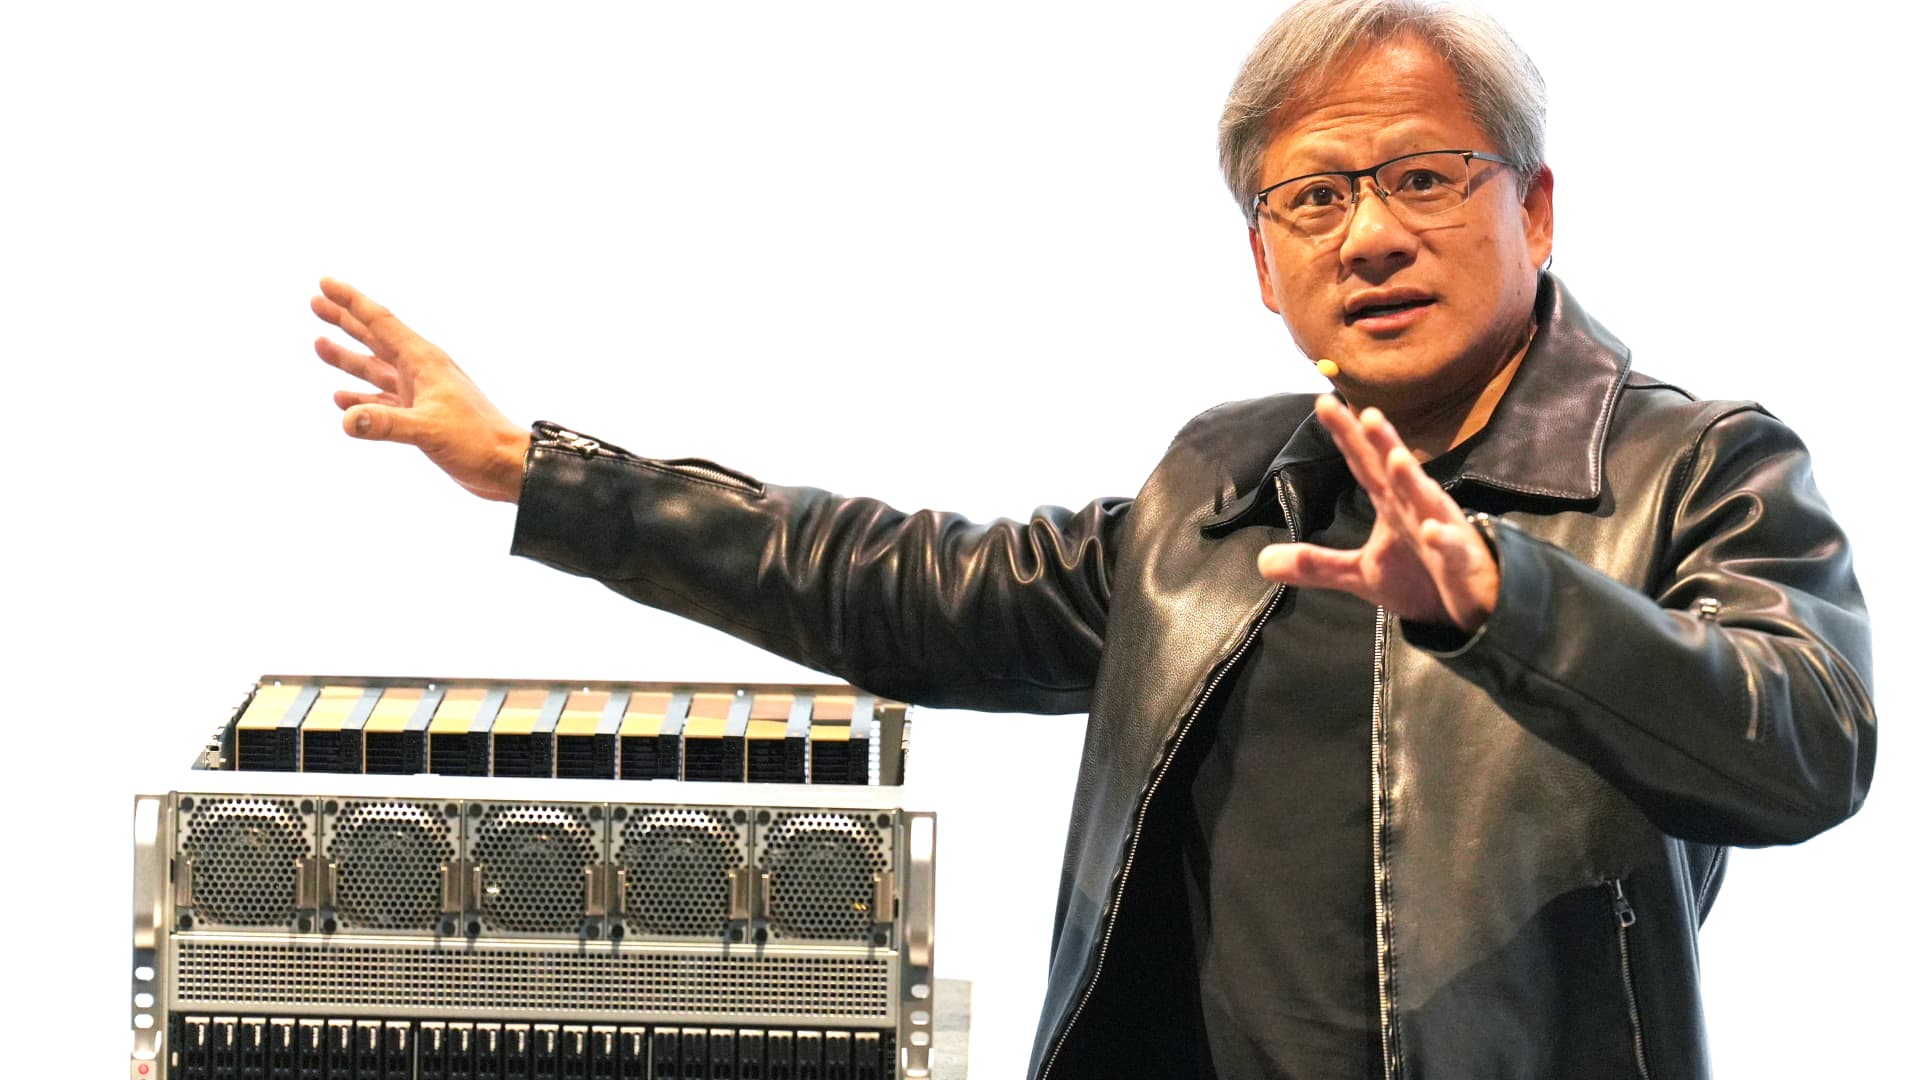 This may be the most bullish note we’ve seen on Nvidia — signaling what’s next for the stock